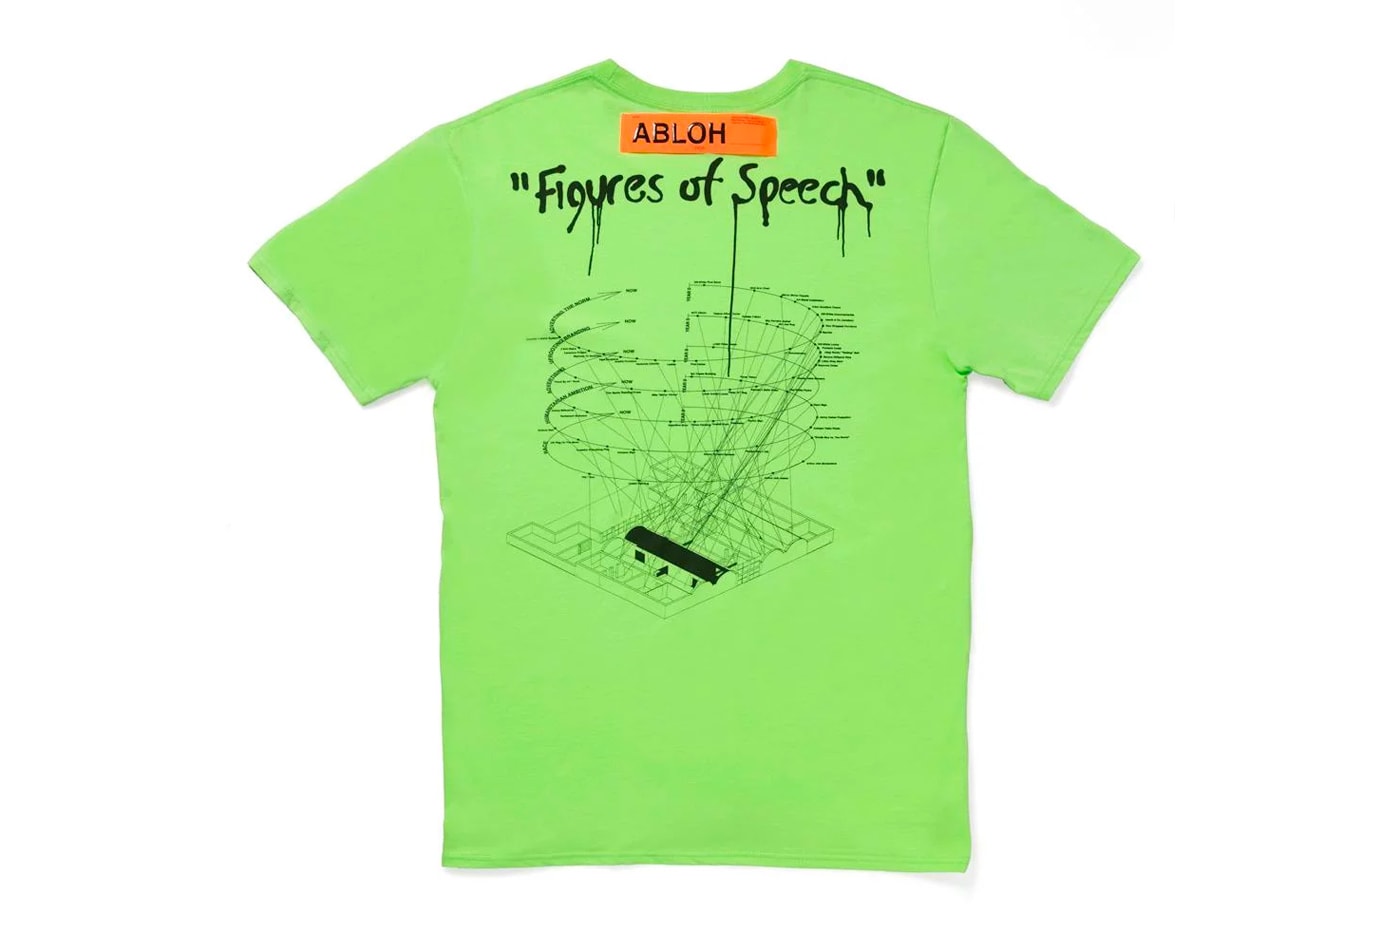 Off-White x Virgil Abloh MCA Chicago - Figures Of Speech T-Shirt Size M  Used